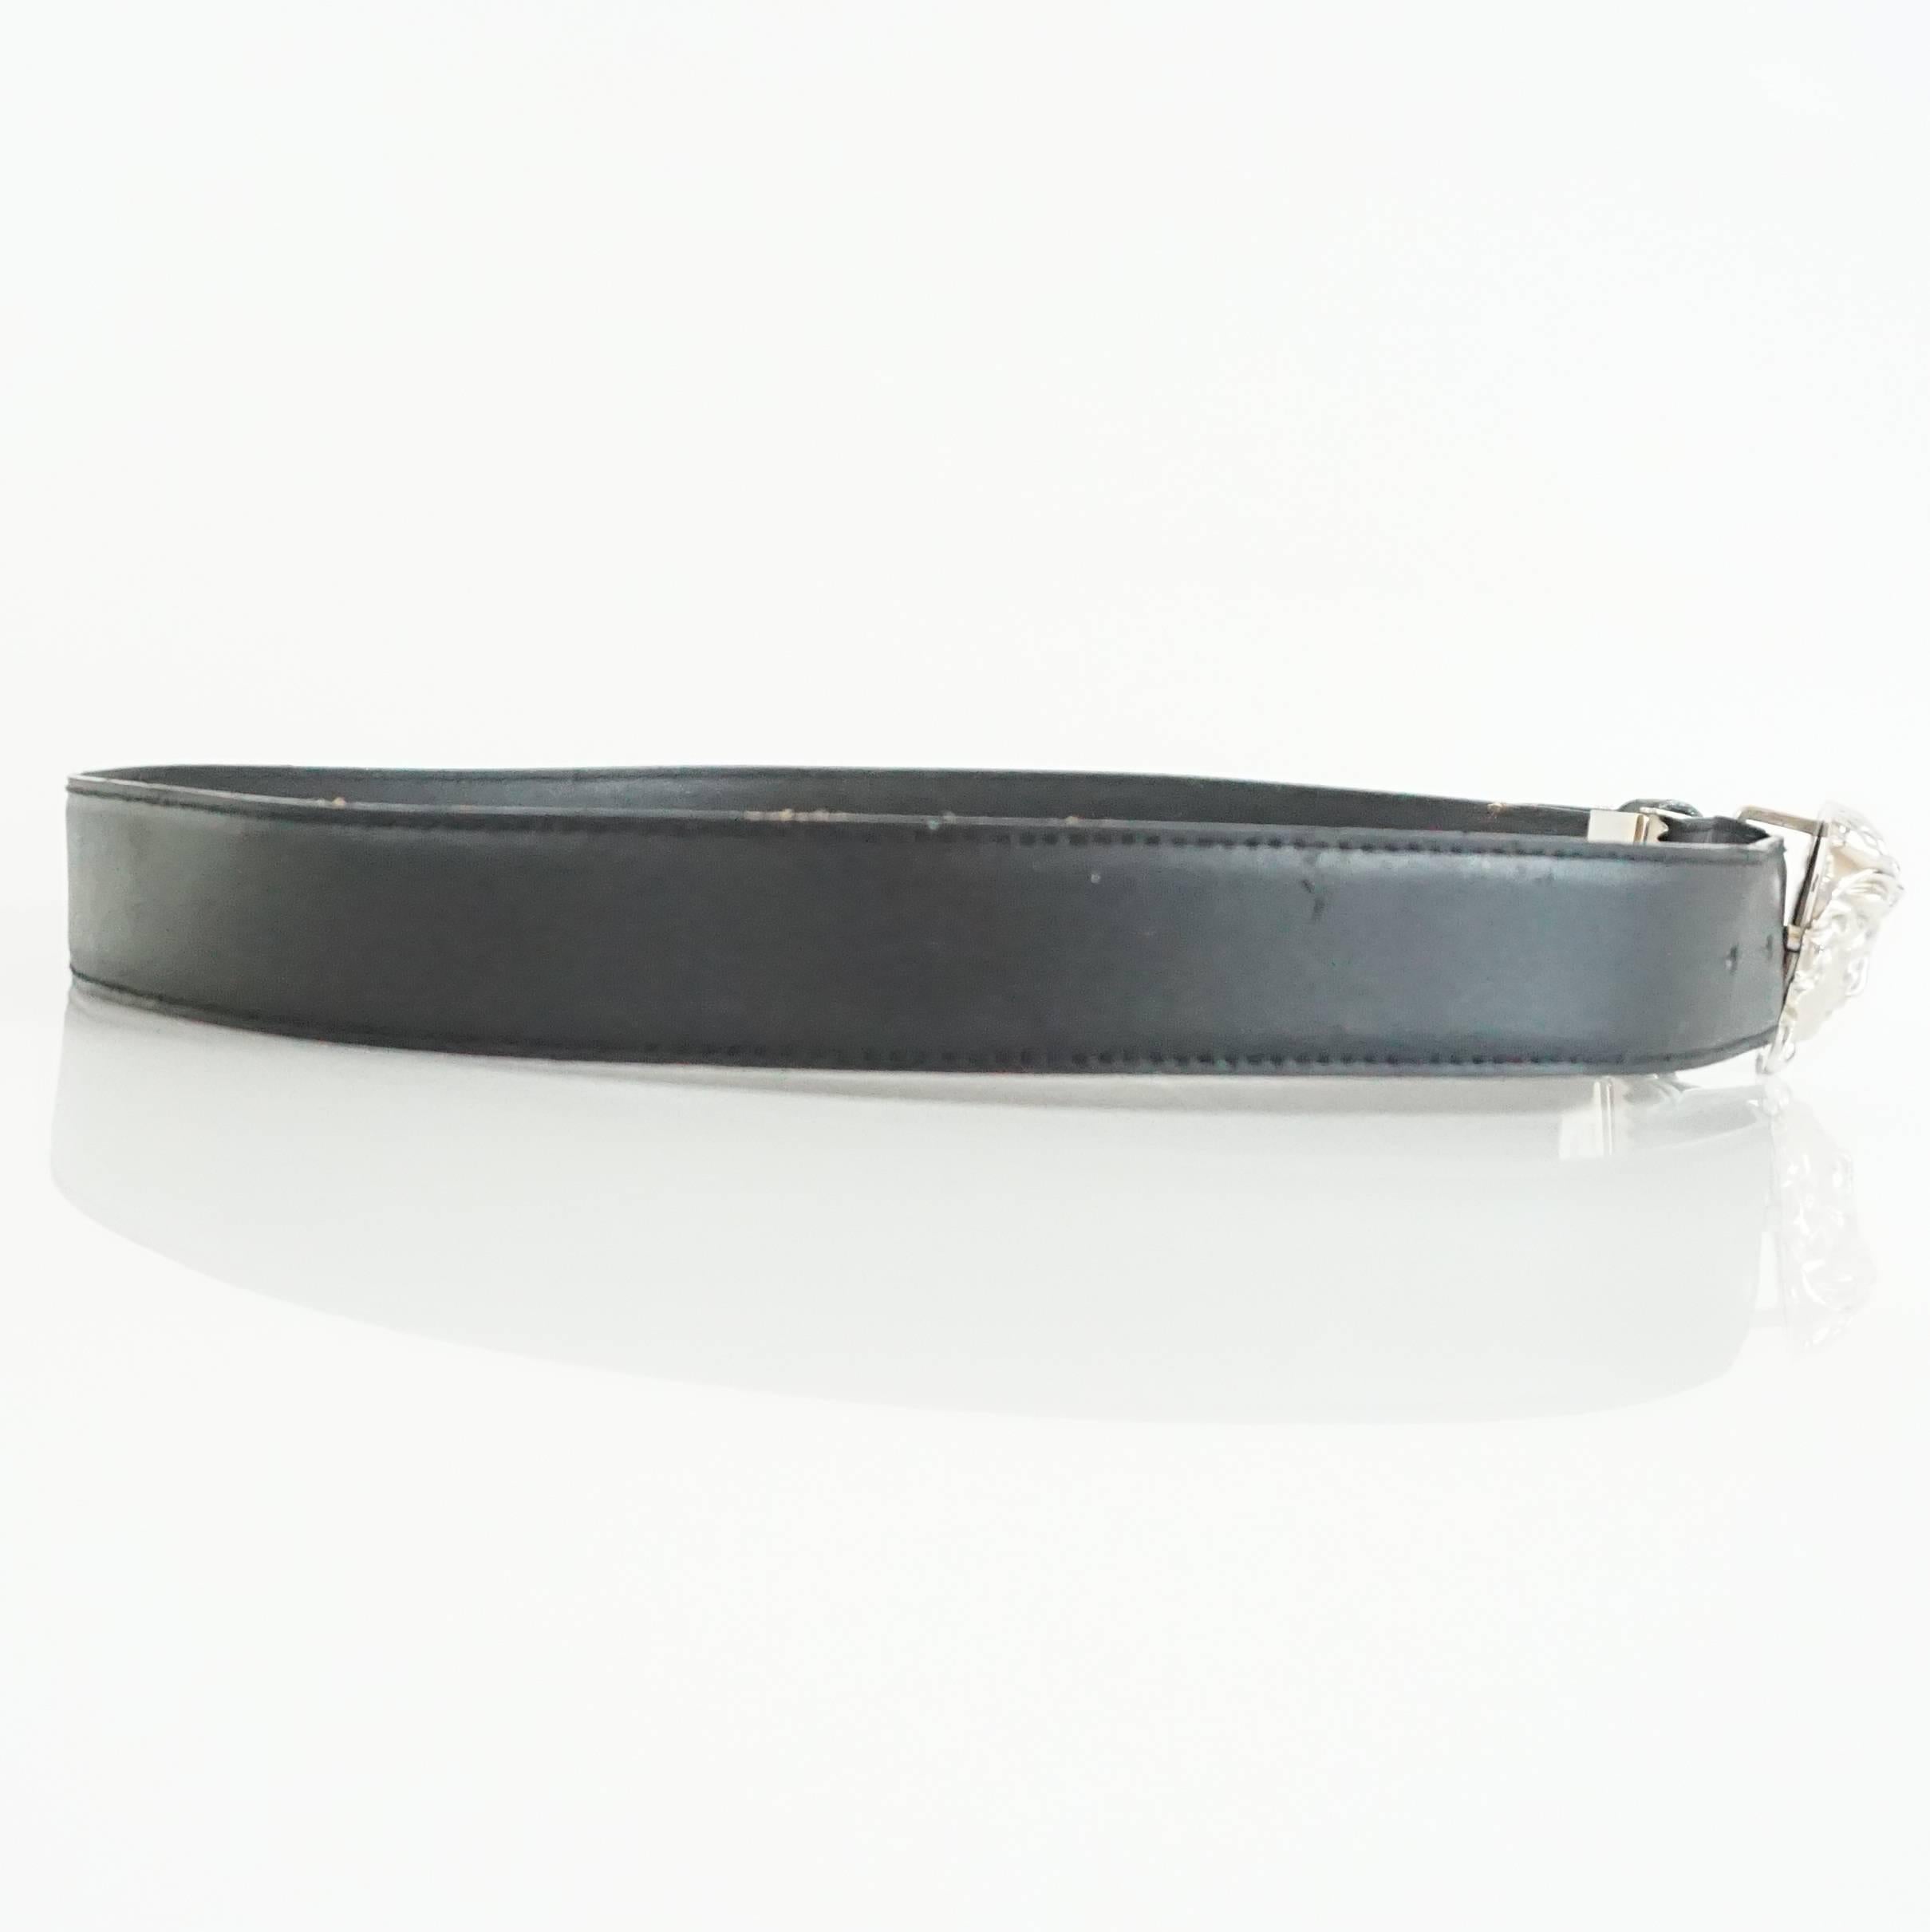 This Versace belt is black leather. The buckle is a silver Medusa head. This belt is in very good condition with some wear on the leather. size 80/32

Measurements
Length: 29.5 - 33.5